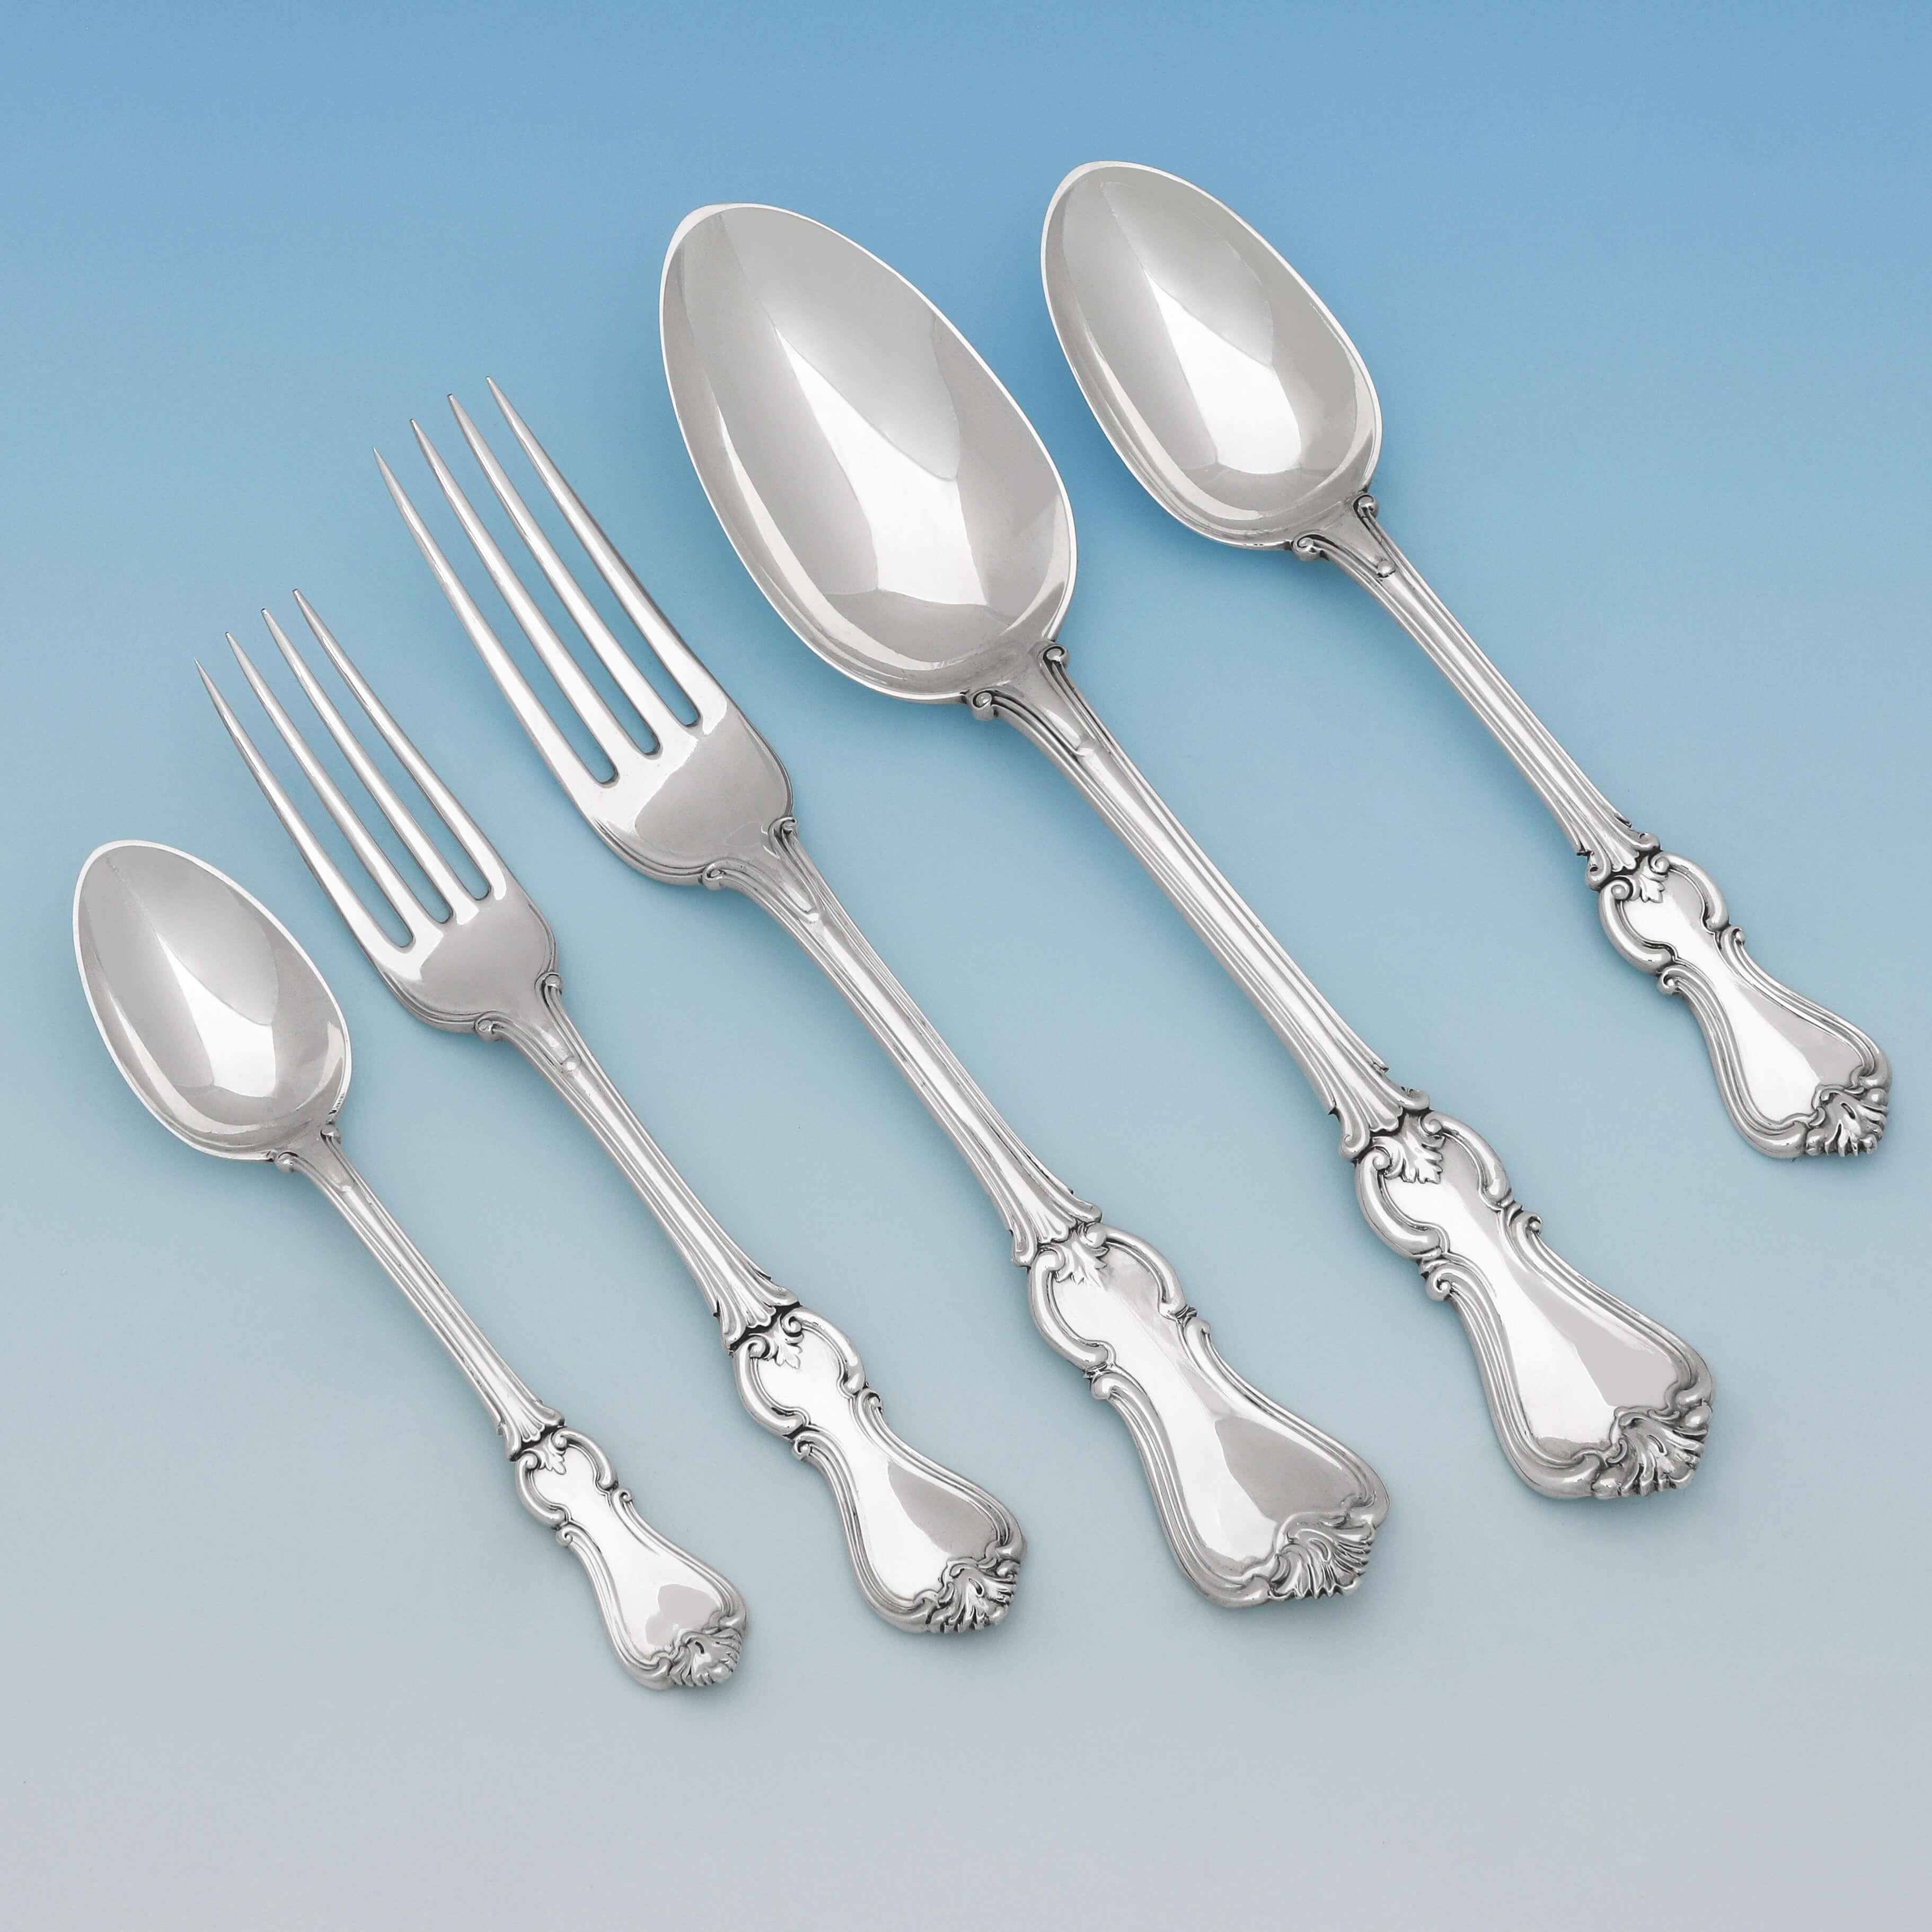 A single maker, mixed years set of antique, Victorian, sterling silver Albert pattern flatware, made in London by George Adams between 1846 and 1871.

Sold with modern Albert pattern sterling silver knives as pictured. 
Each place setting